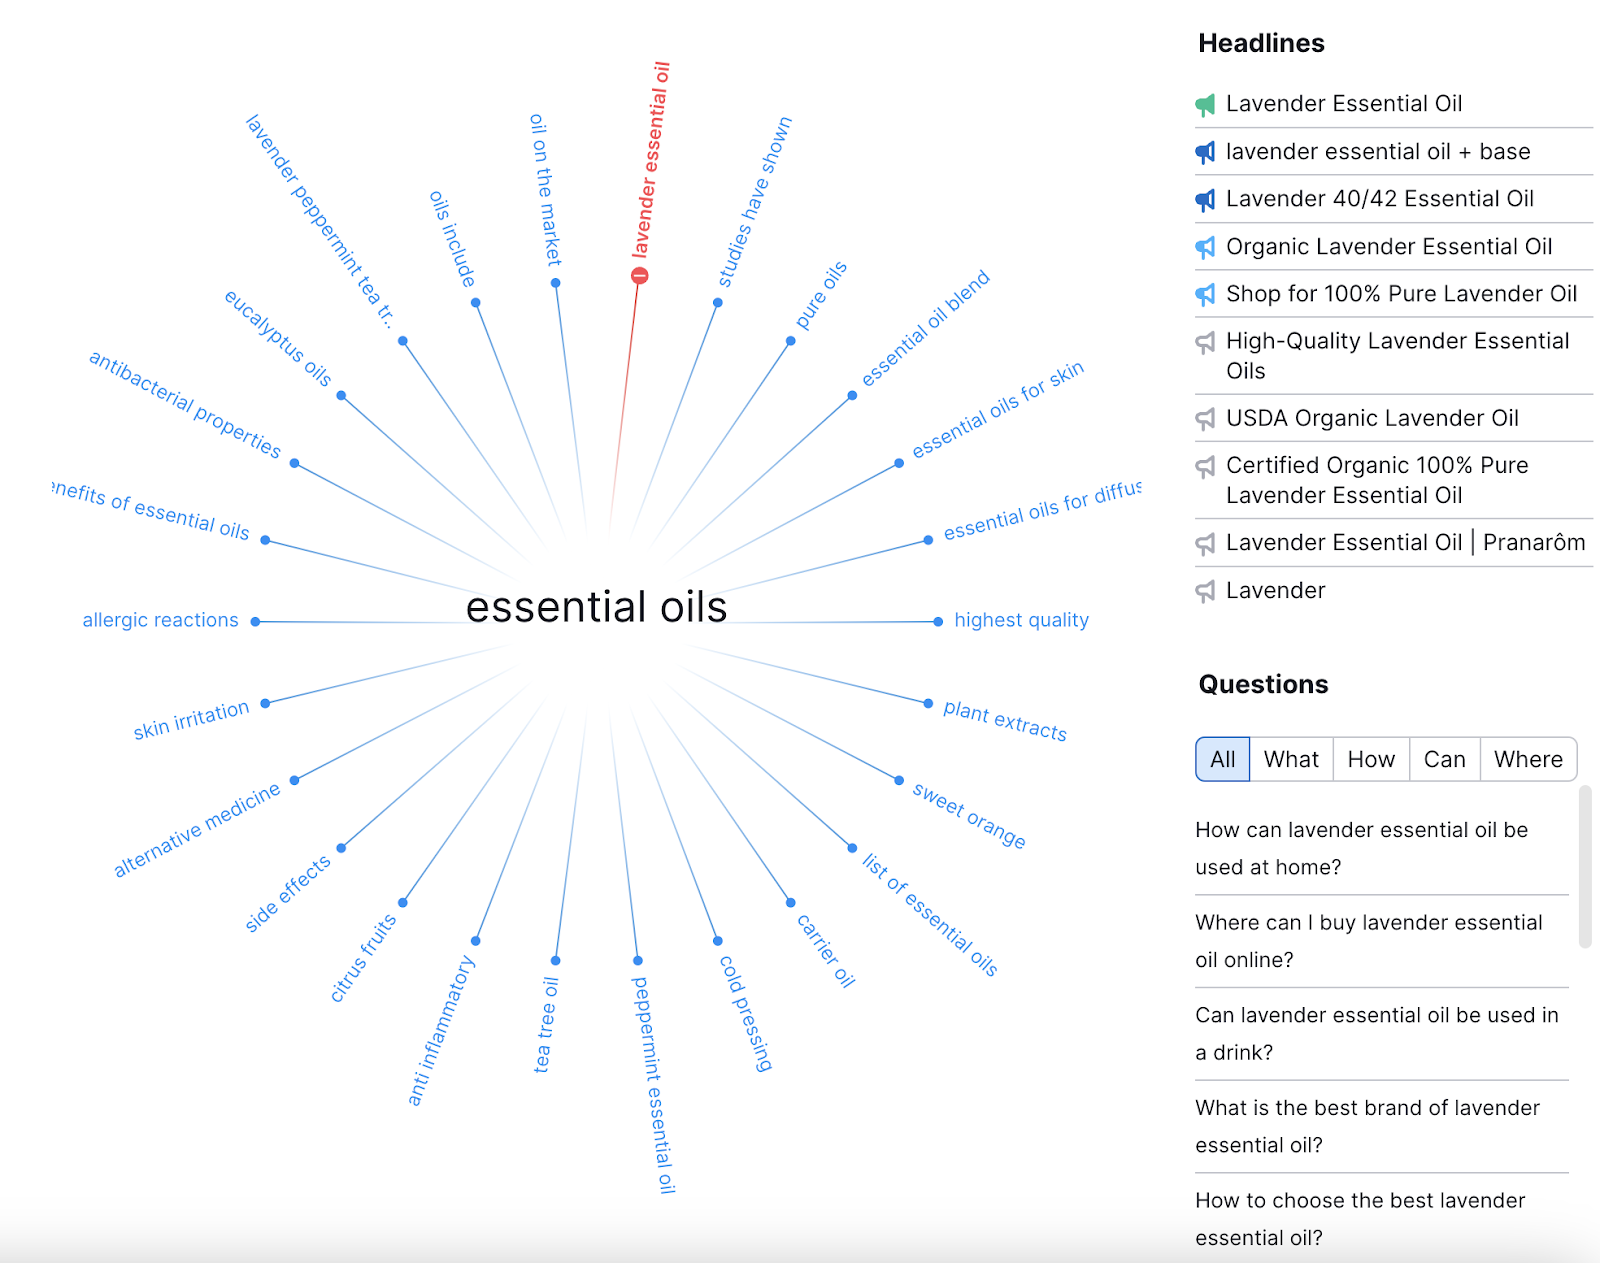 topic research tool's mind map view of essential oils with topics branching out from the center